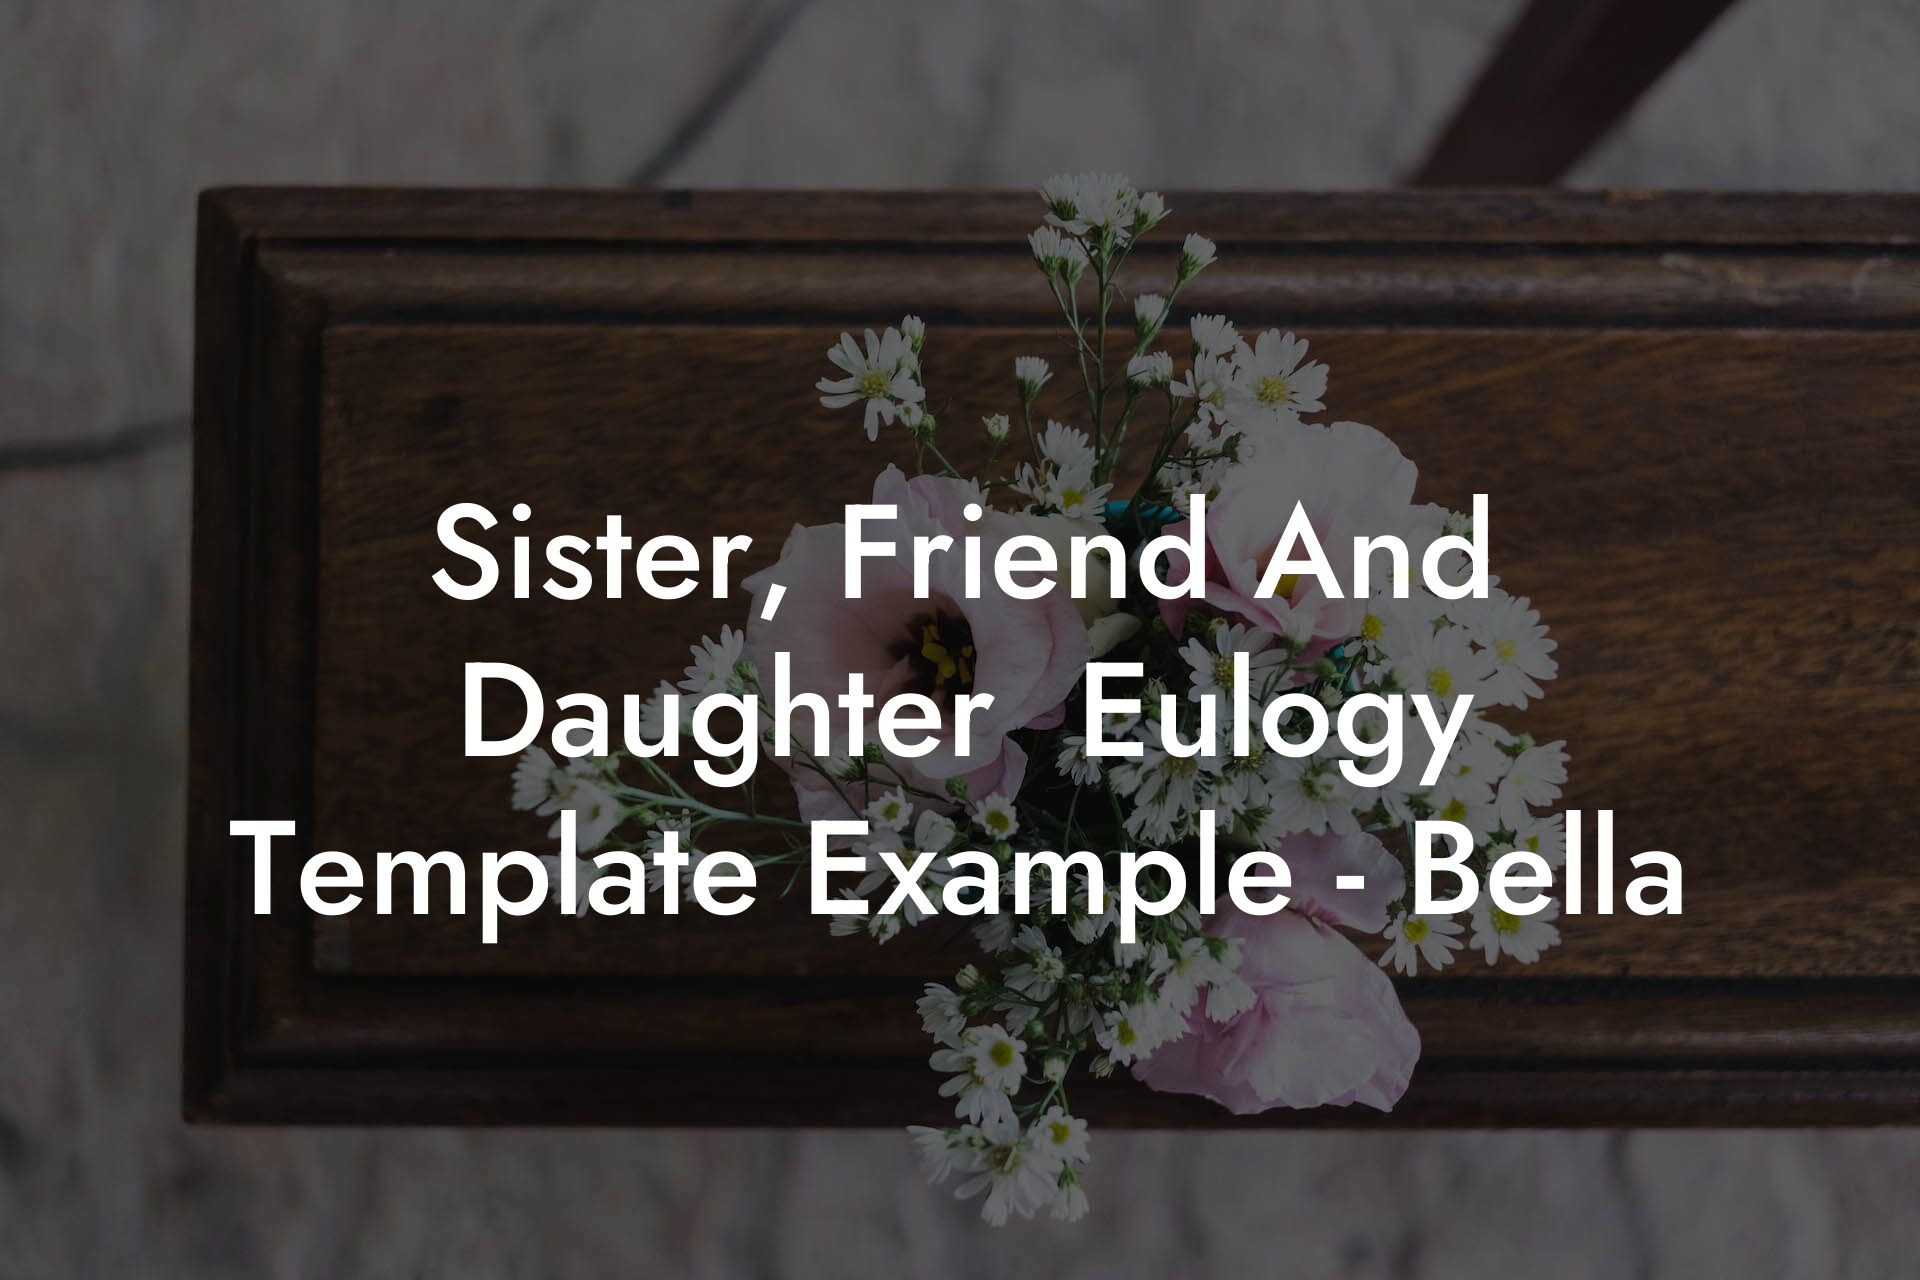 Sister, Friend And Daughter  Eulogy Template Example - Bella